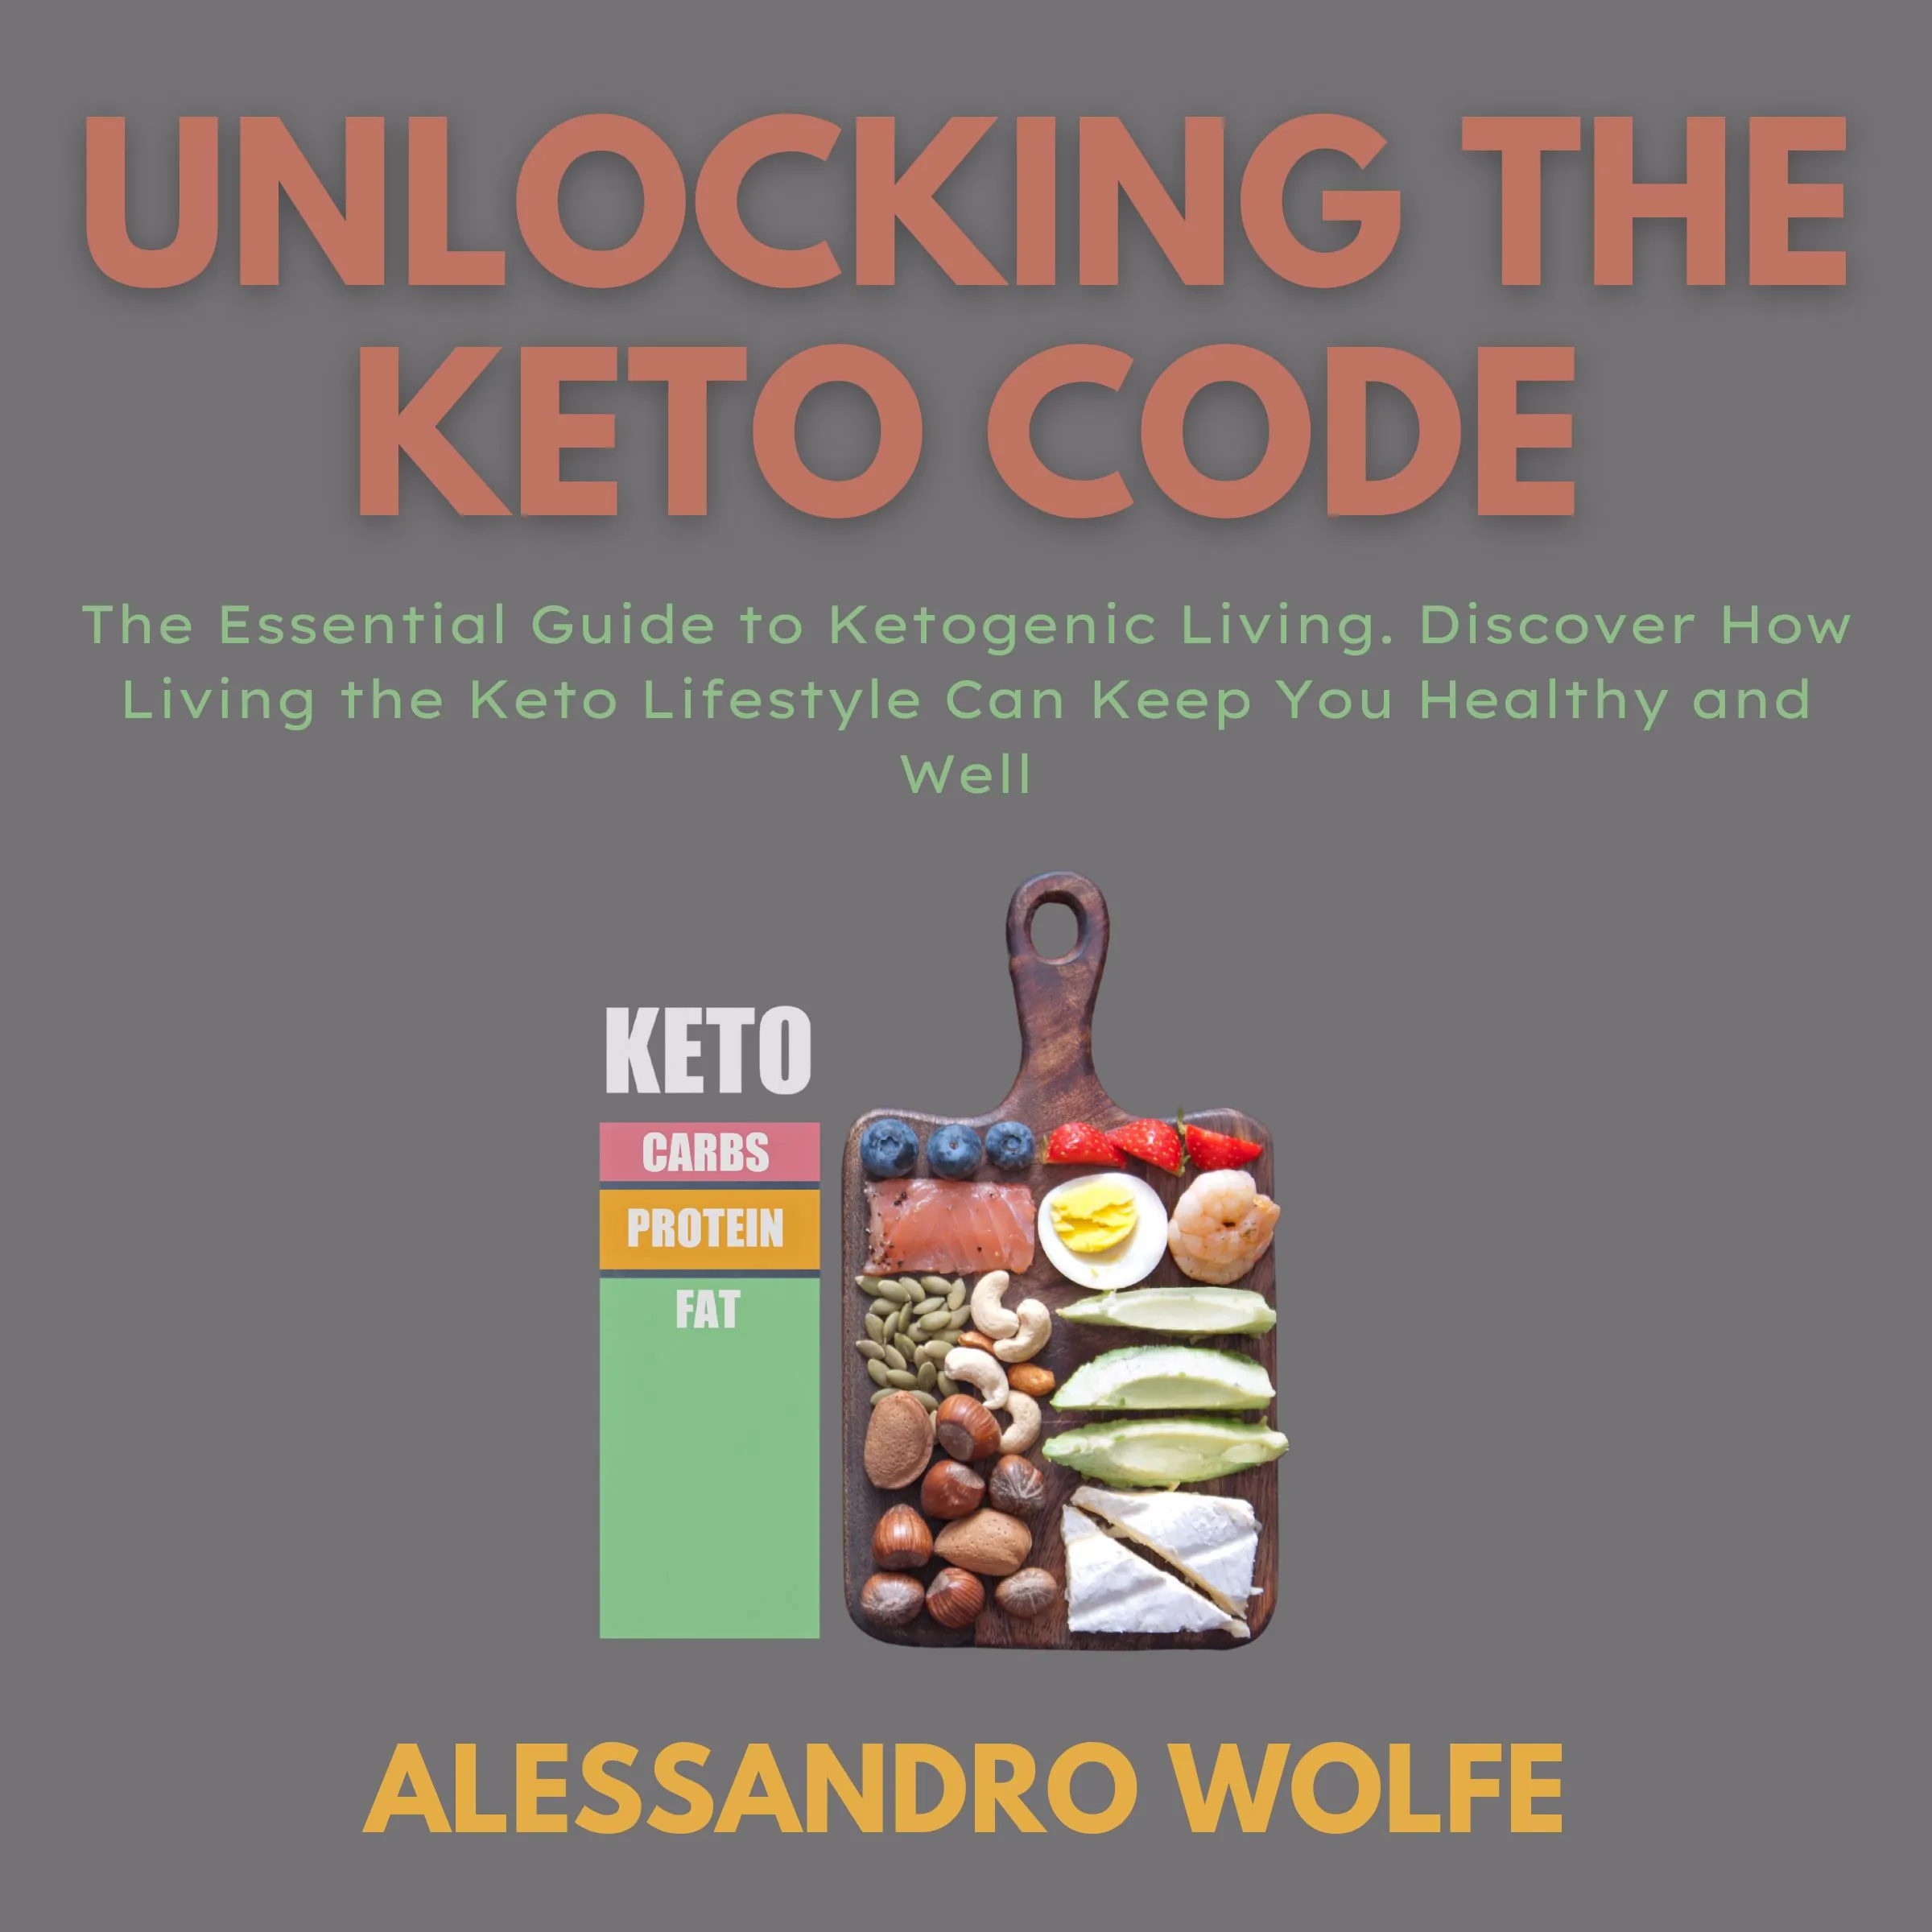 Unlocking the Keto Code Audiobook by Alessandro Wolfe